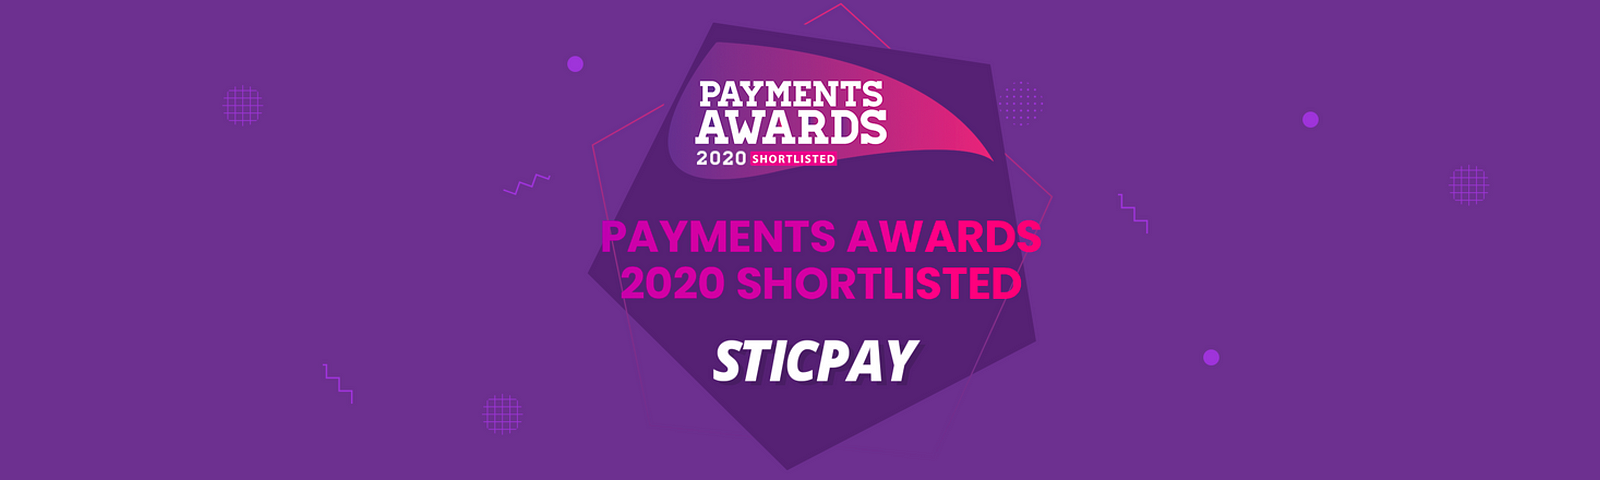 STICPAY is shortlisted for five Payments Awards 2020